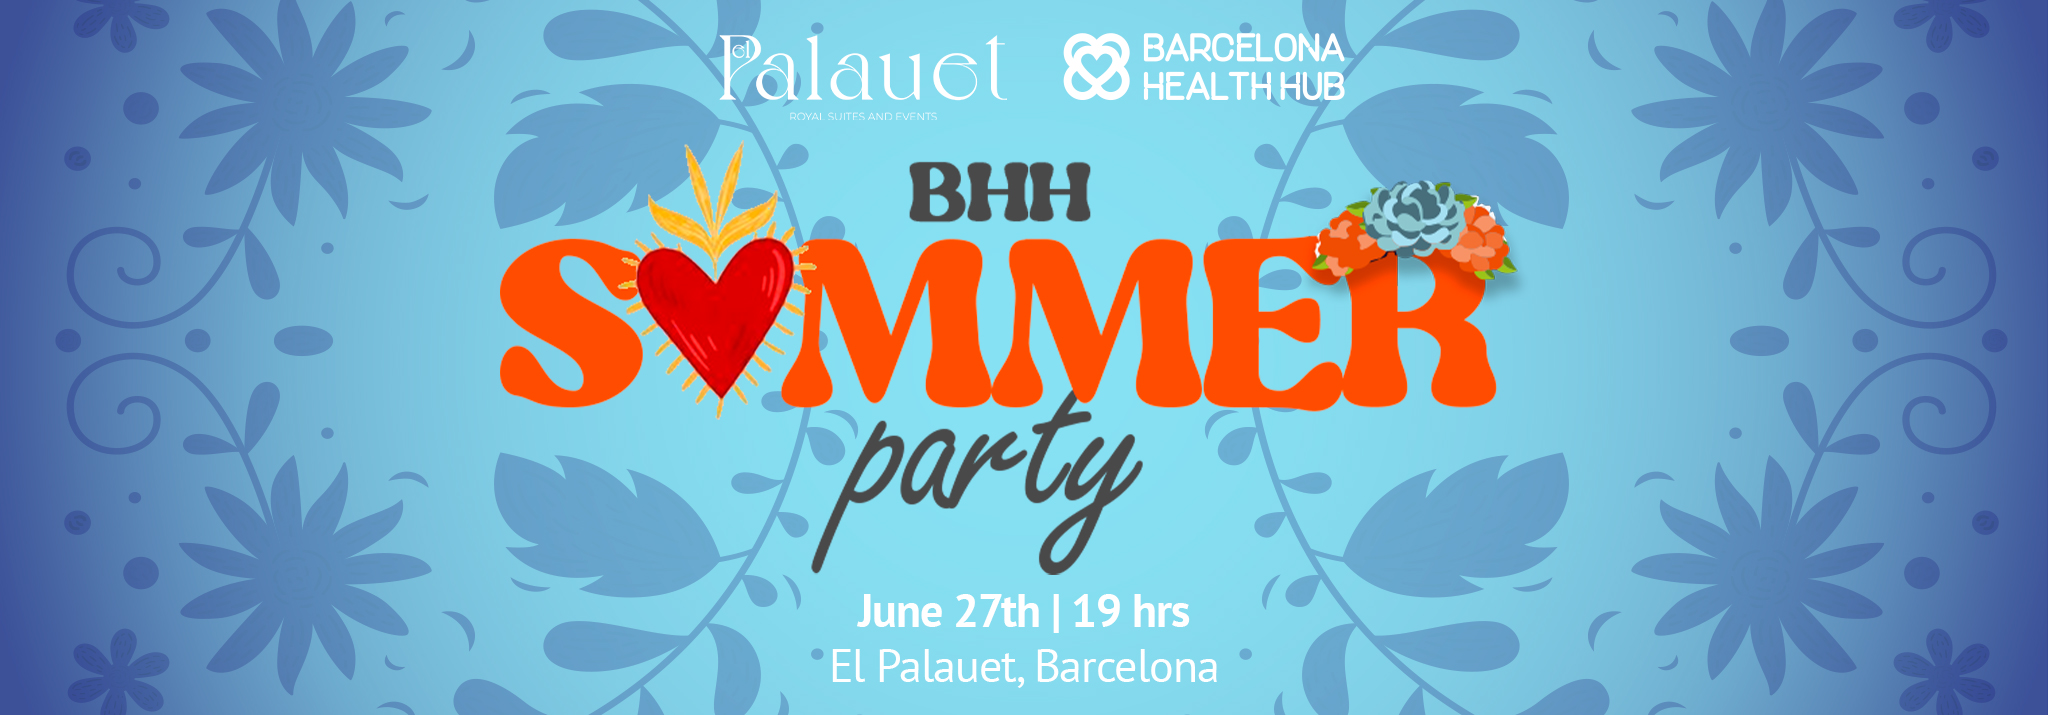 Let's kick off summer together at the BHH Summer Party!